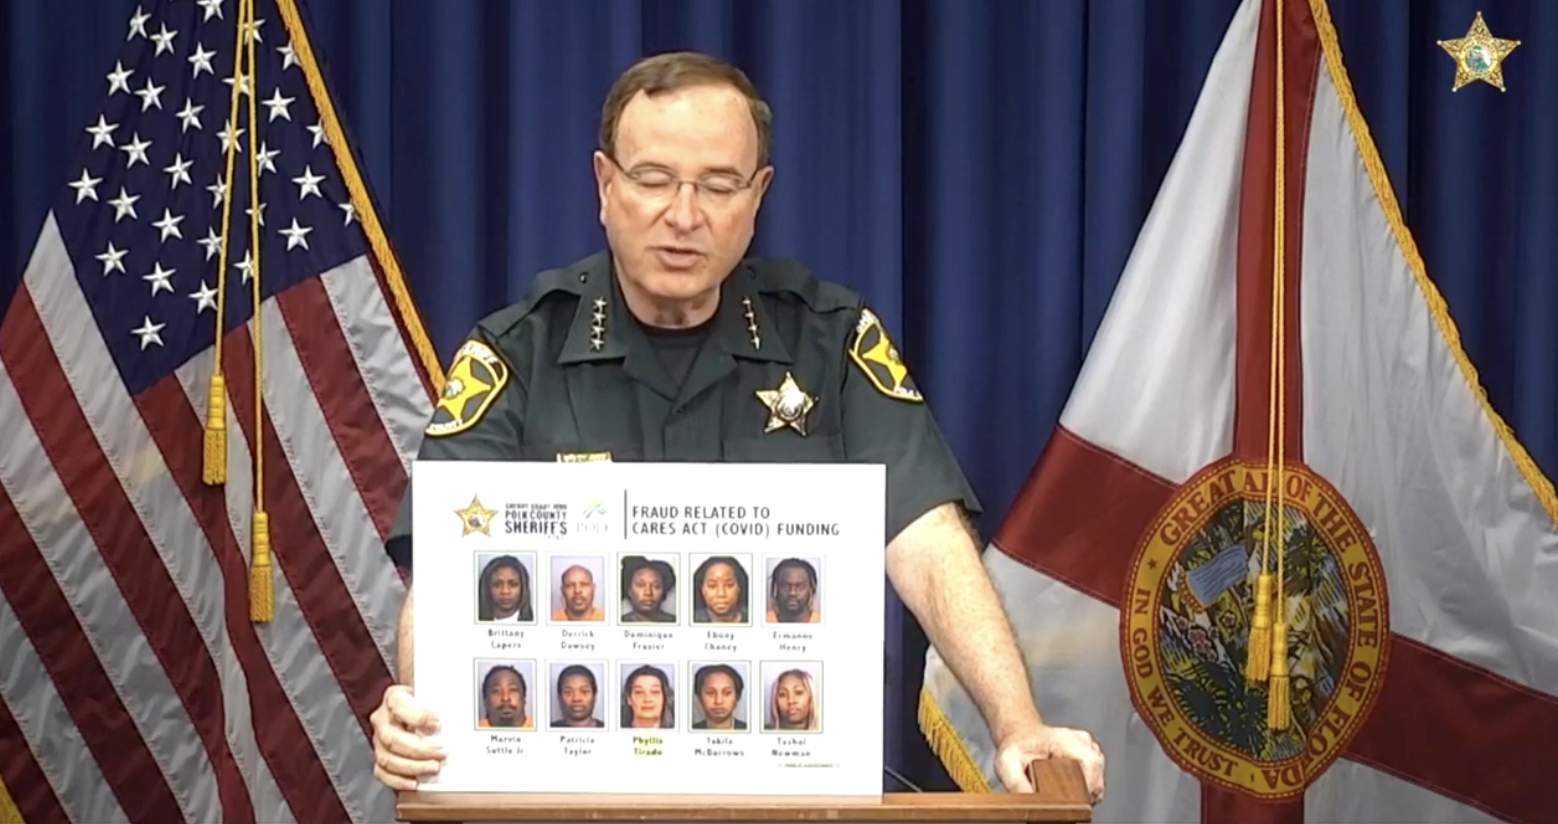 11 suspects face felony charges after receiving illegal CARES Act funds, deputies say